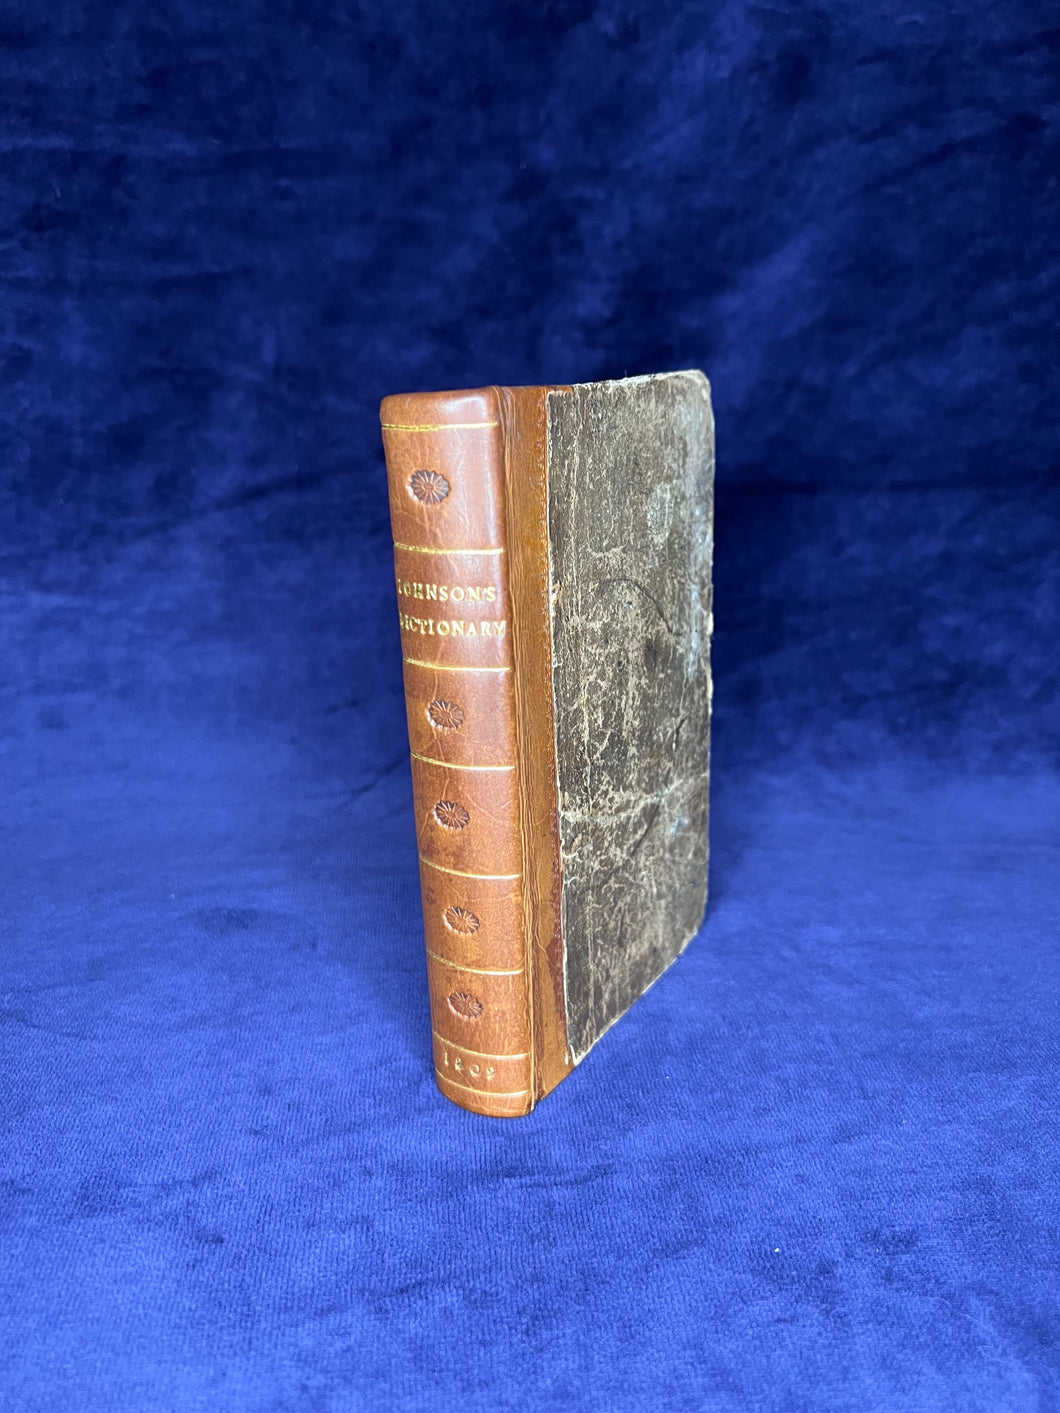 Regional Scottish Print of the Dictionary: Samuel Johnson - Johnson's Dictionary of the English Language in Miniature  (1809)